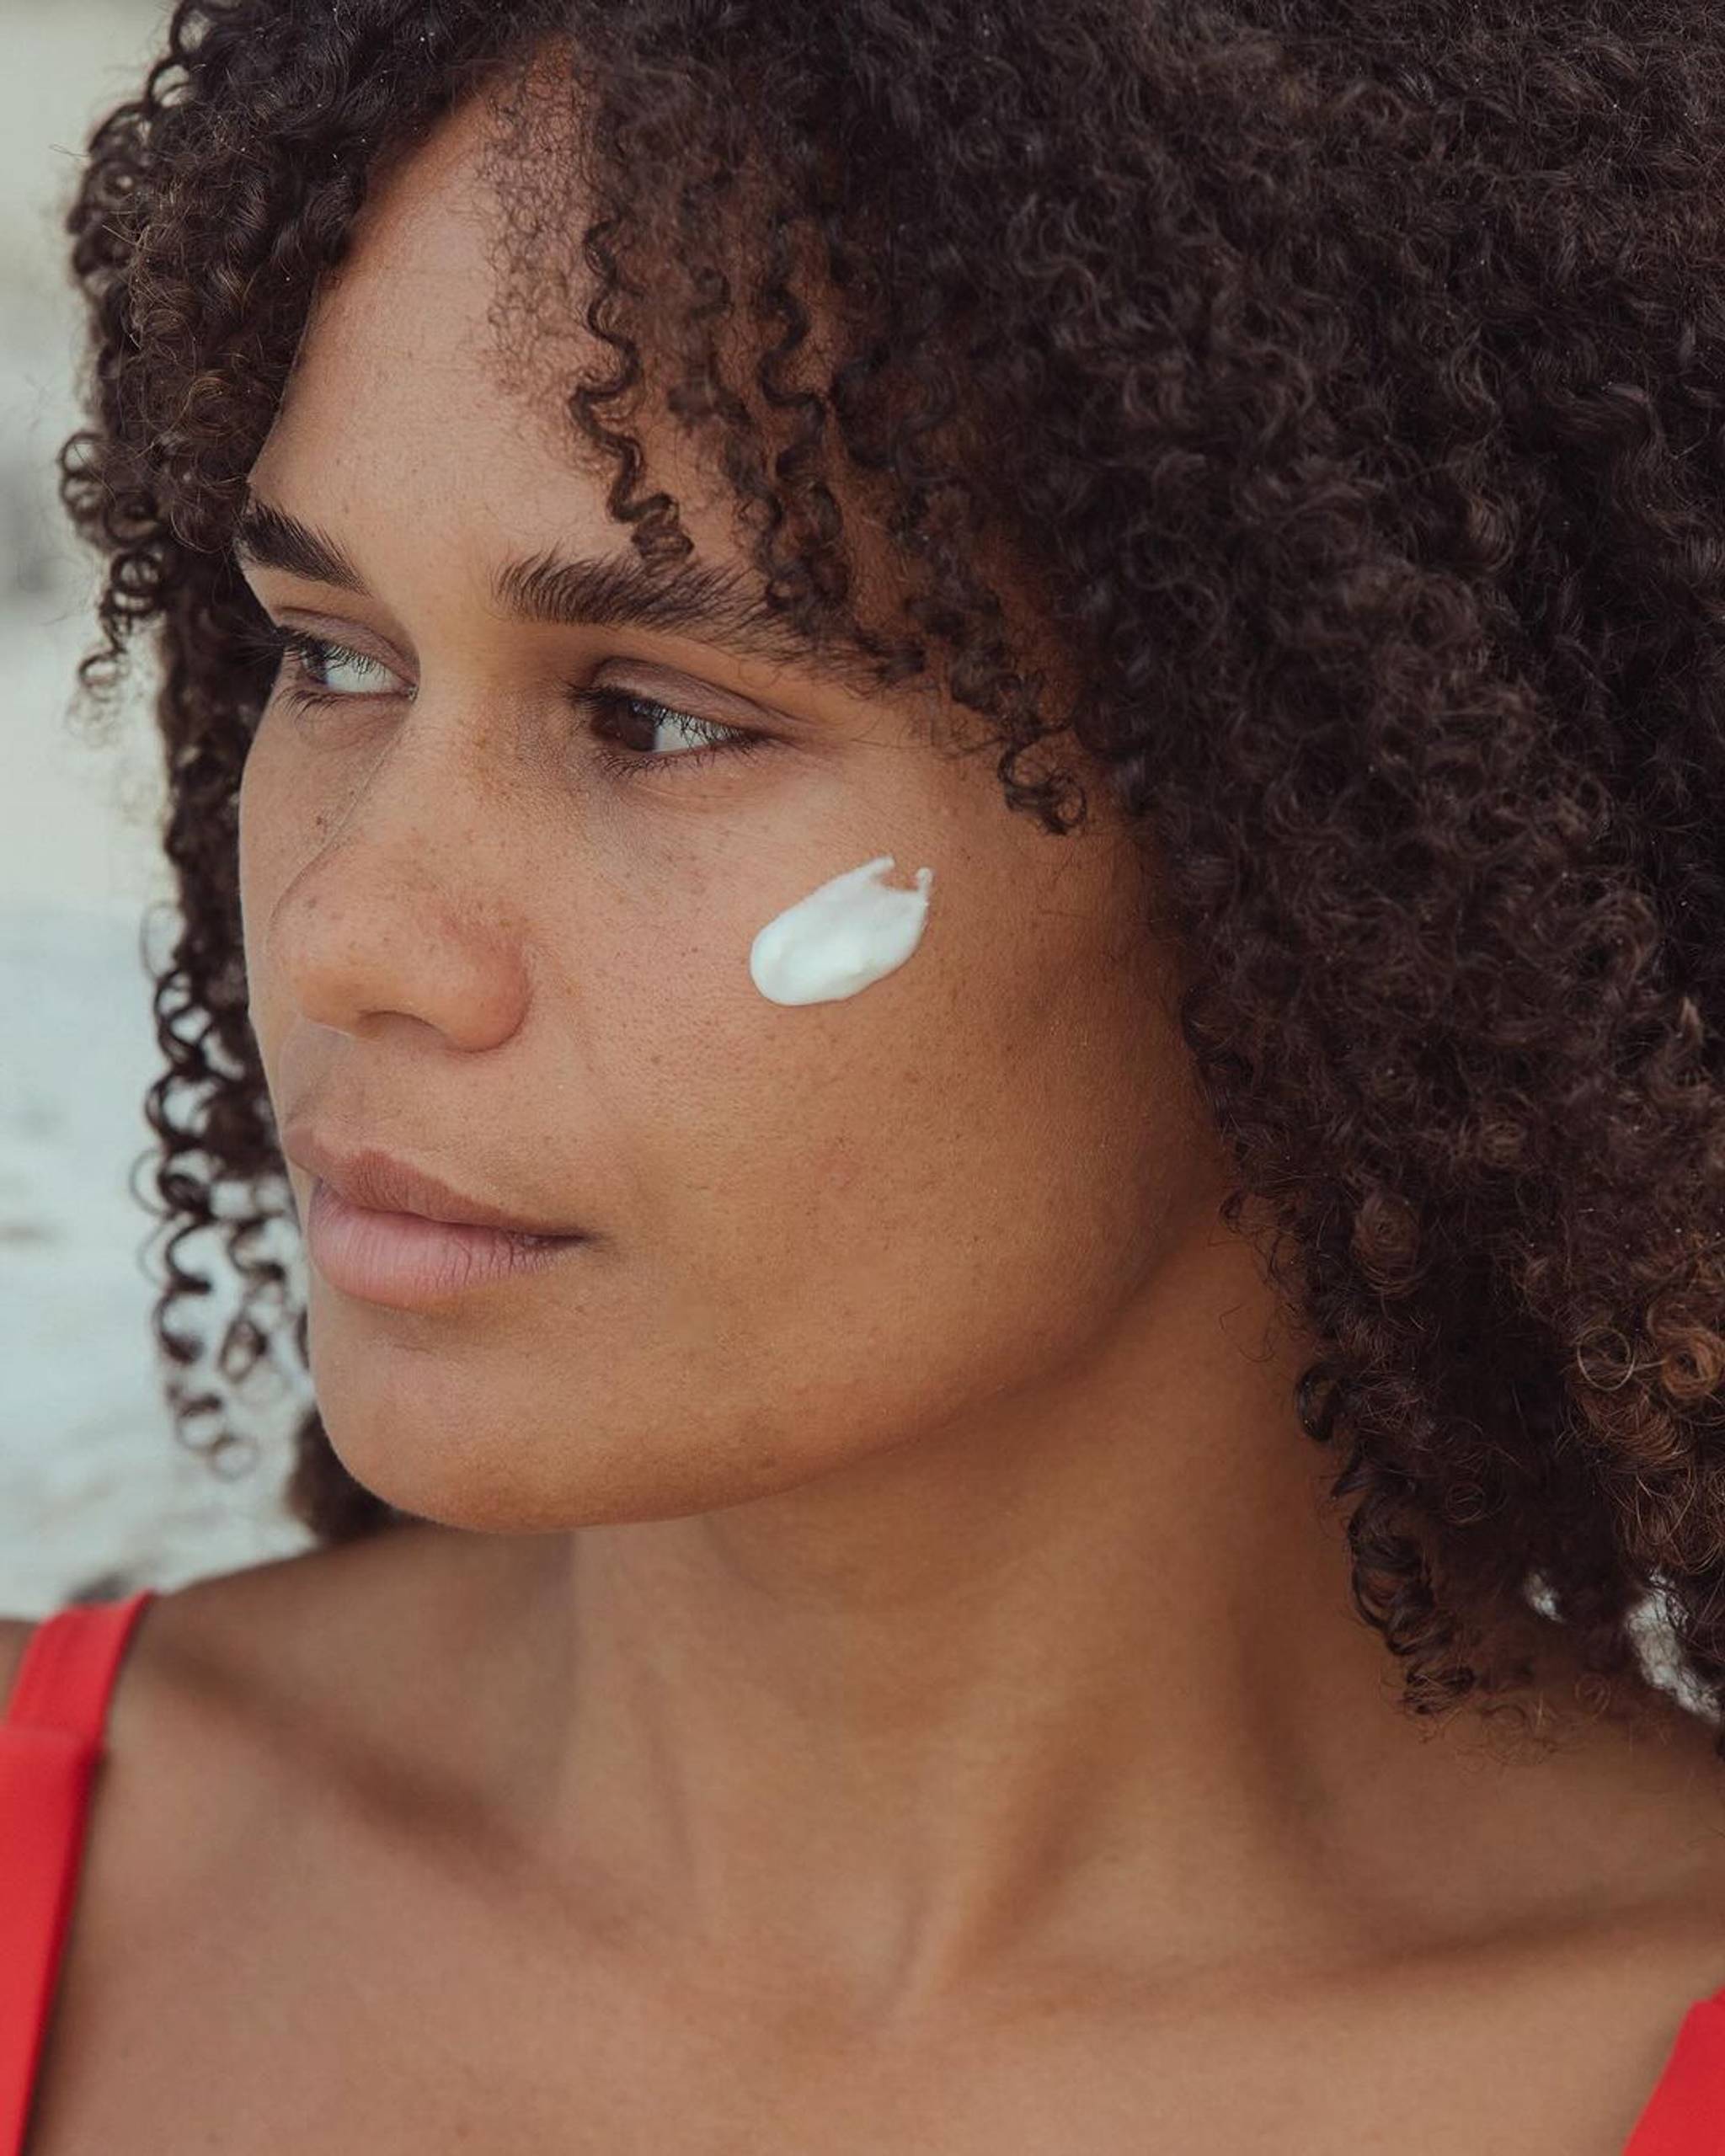 Australians are turning to Indigenous beauty brands – here’s why